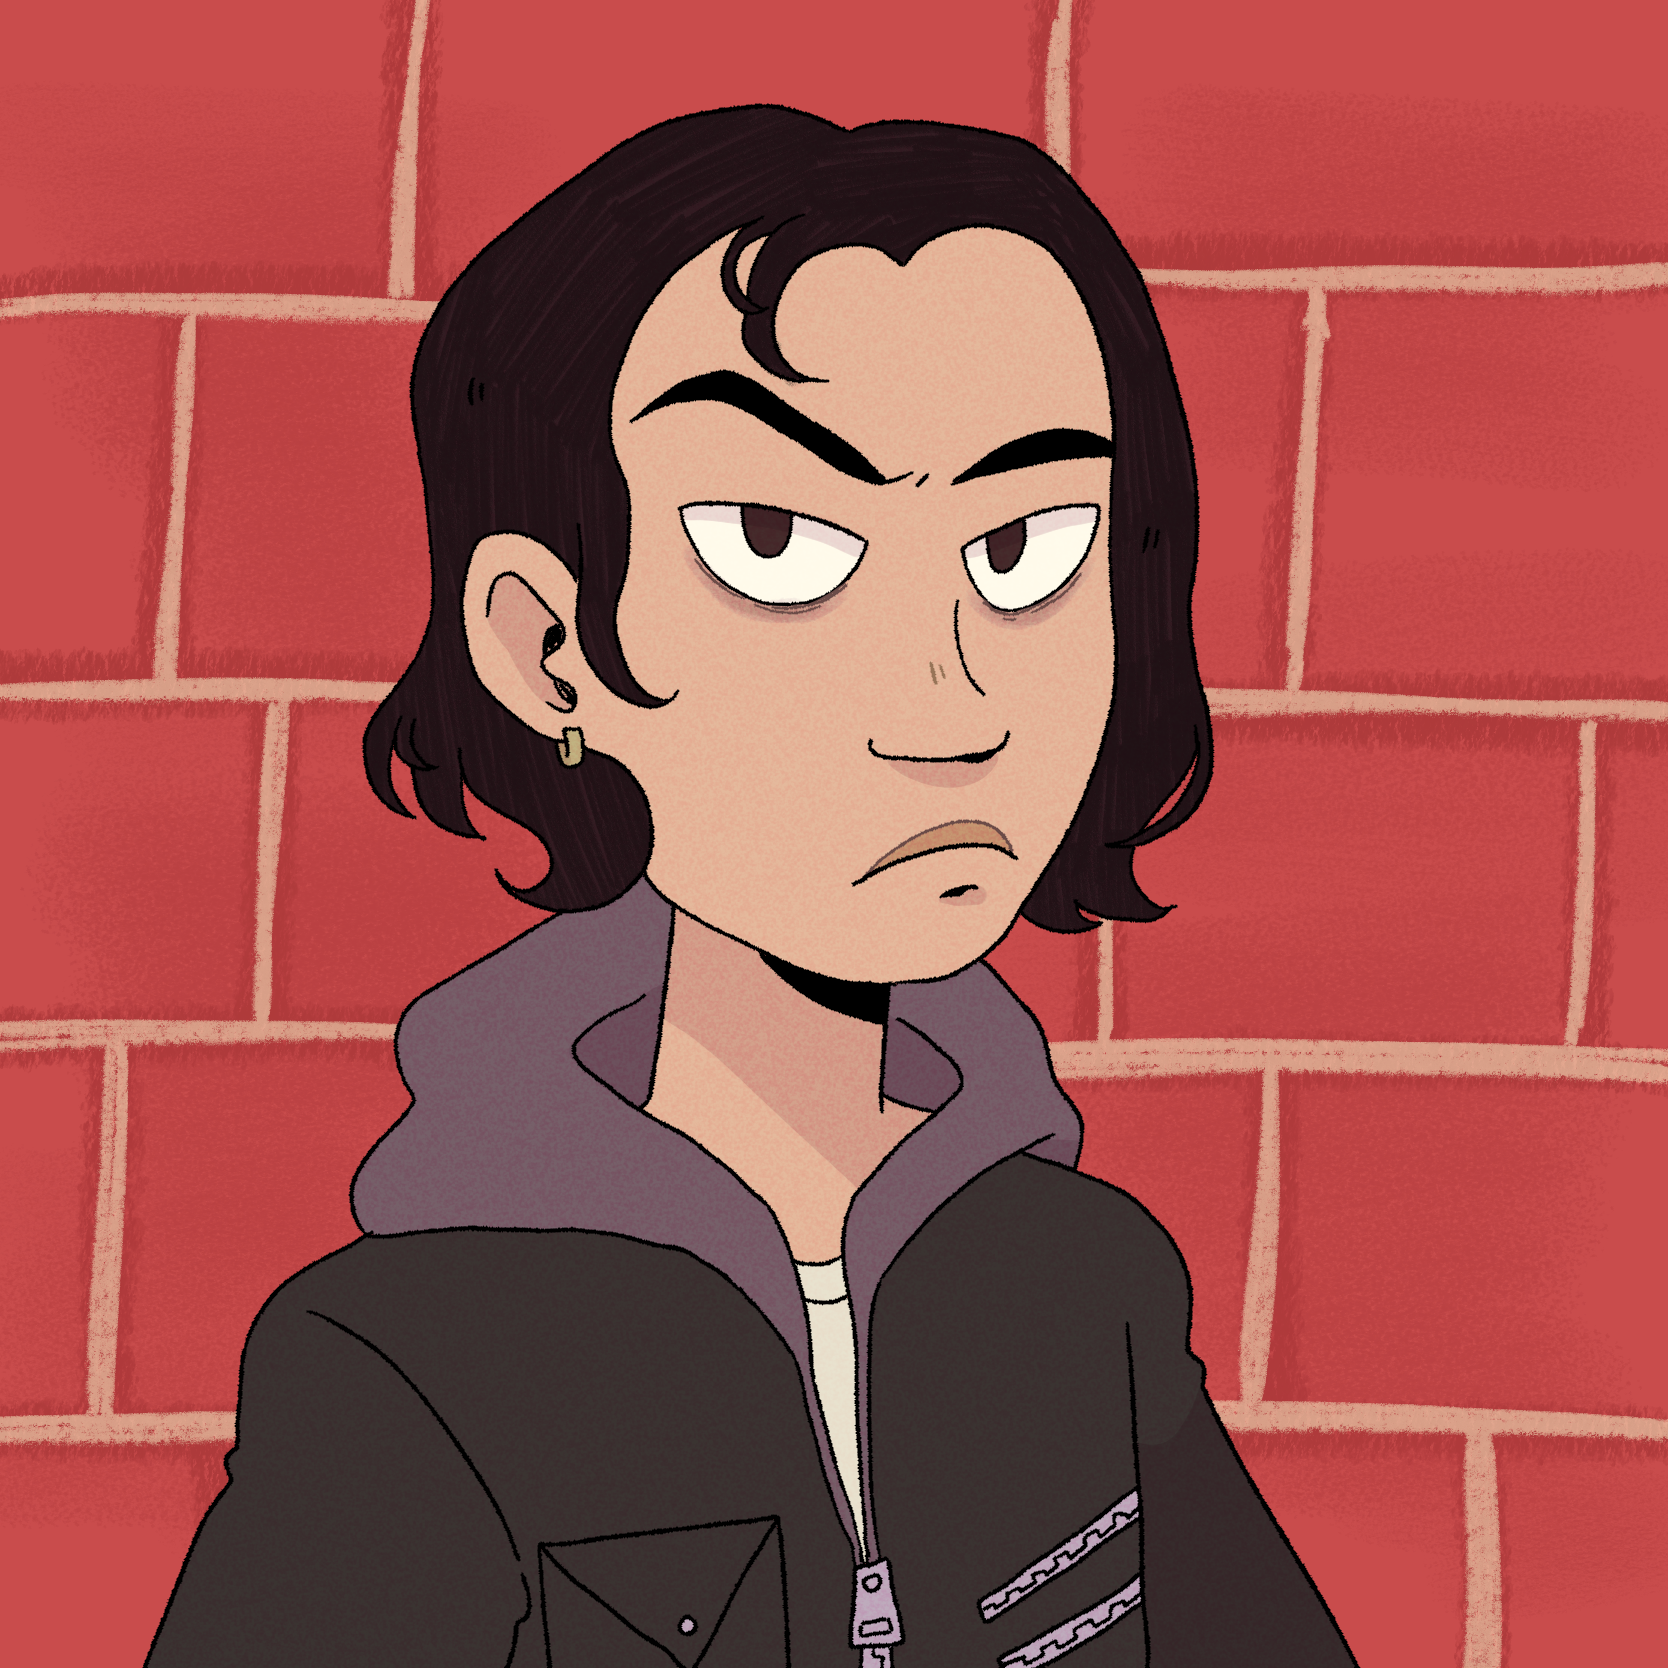 A drawing of a South East Asian person with chin length black hair and dark brown eyes scowling with a raised eyebrow. He is wearing a white t shirt under a hooded black zippered leather jacket. A lock of their hair is tucked behind a pierced ear. The background is a red brick wall.